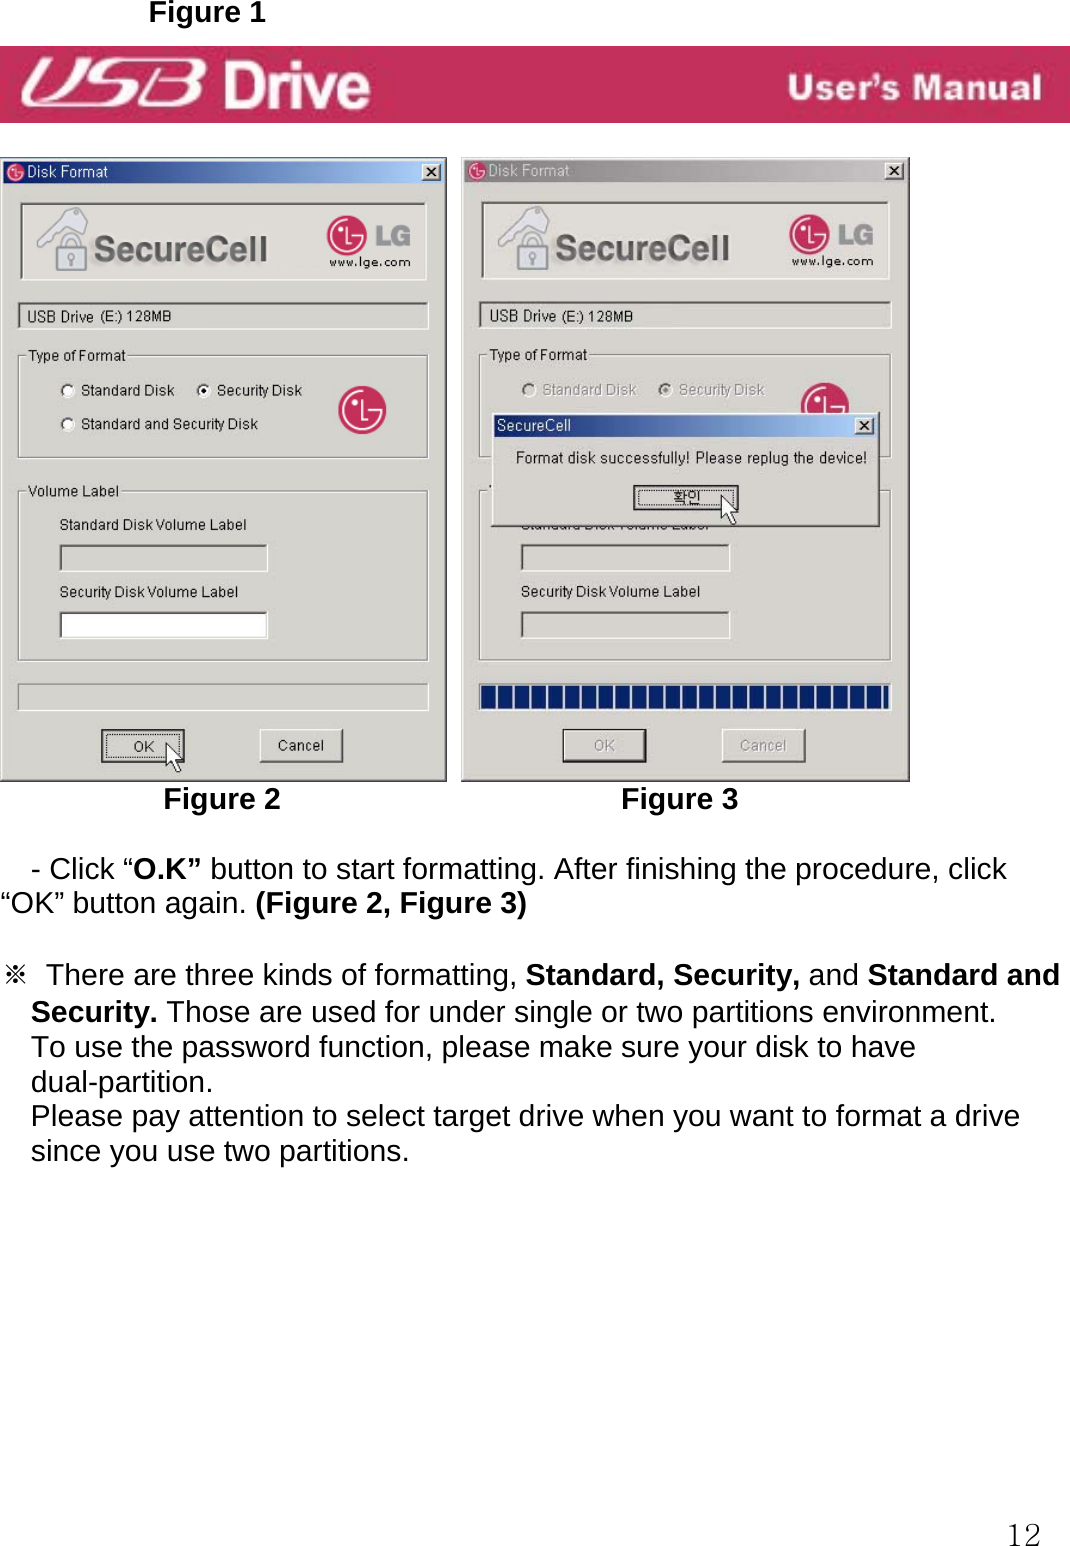  12          Figure 1               Figure 2                       Figure 3  - Click “O.K” button to start formatting. After finishing the procedure, click “OK” button again. (Figure 2, Figure 3)  ※  There are three kinds of formatting, Standard, Security, and Standard and Security. Those are used for under single or two partitions environment.     To use the password function, please make sure your disk to have   dual-partition.   Please pay attention to select target drive when you want to format a drive since you use two partitions.         